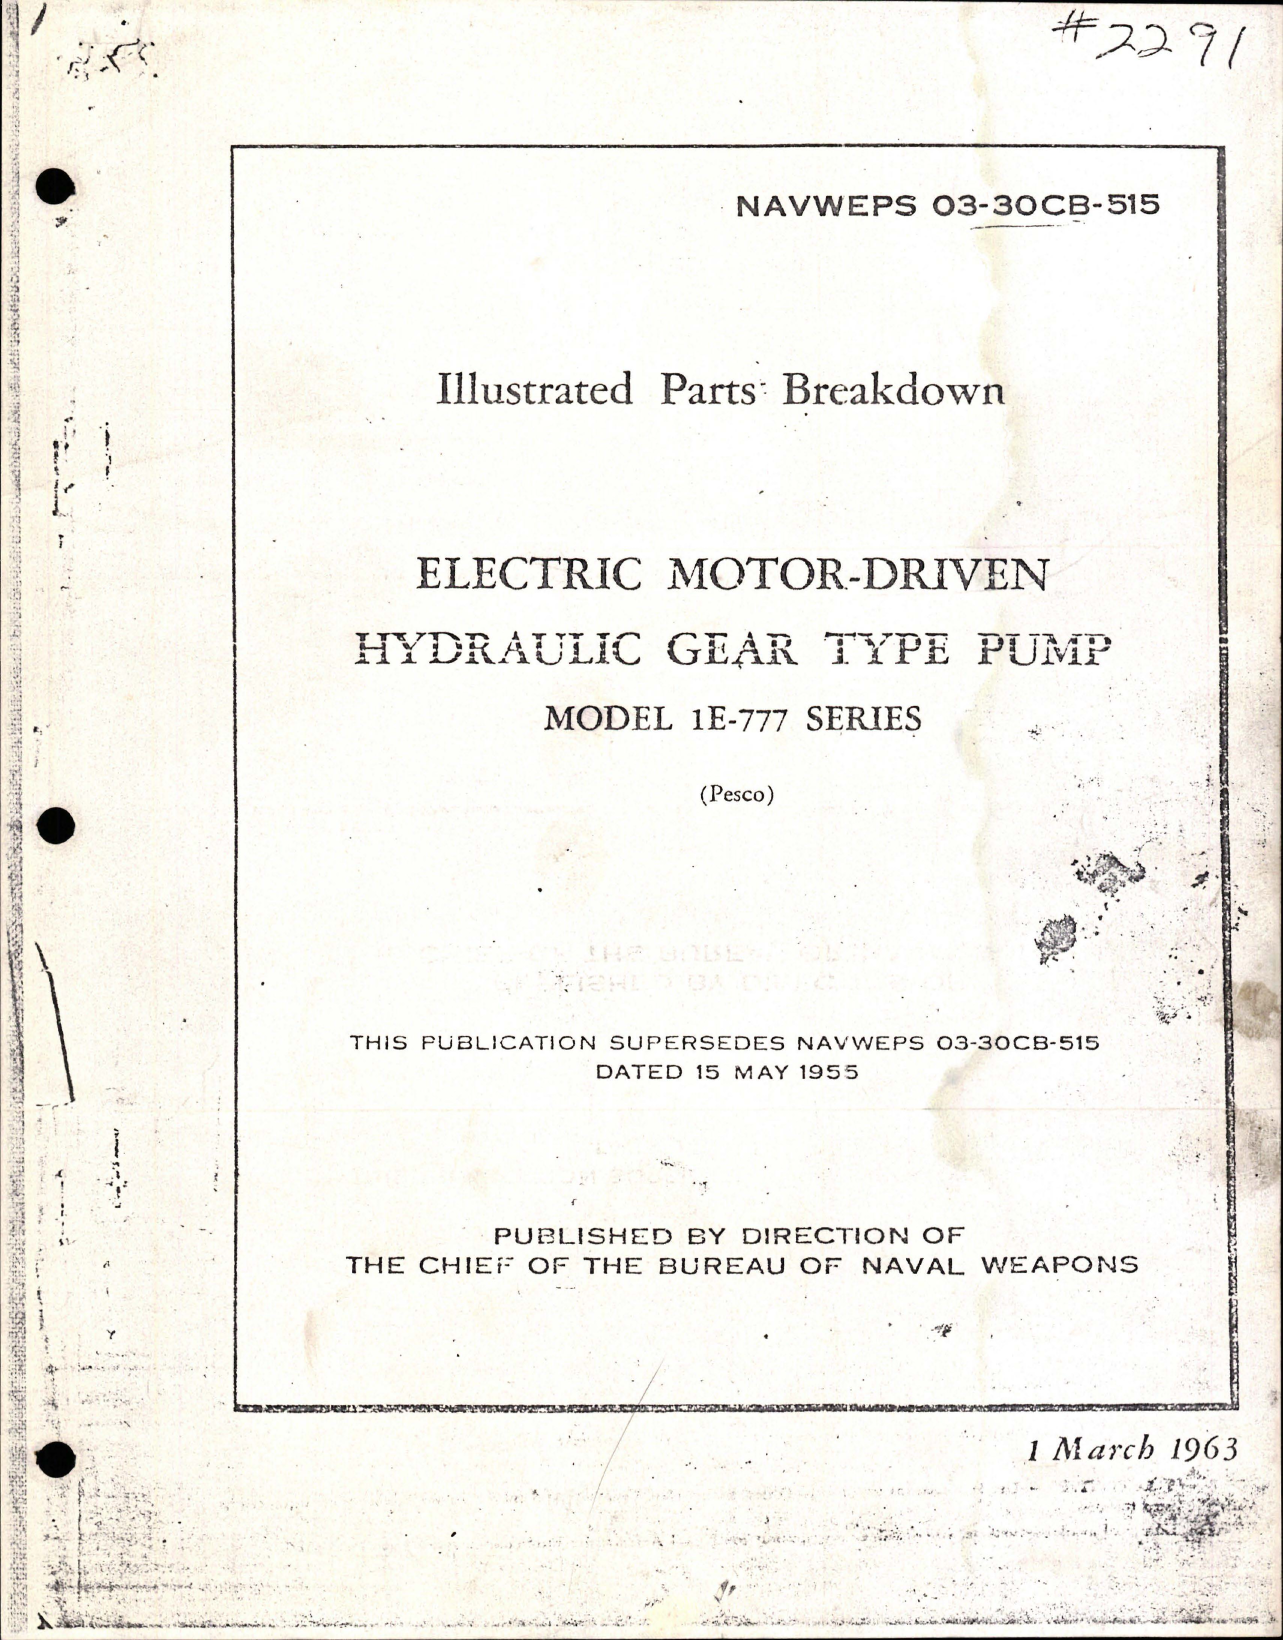 Sample page 1 from AirCorps Library document: Illustrated Parts Breakdown for Electric Motor-Driven Hydraulic Gear Type Pump - Model 1E-777 Series 